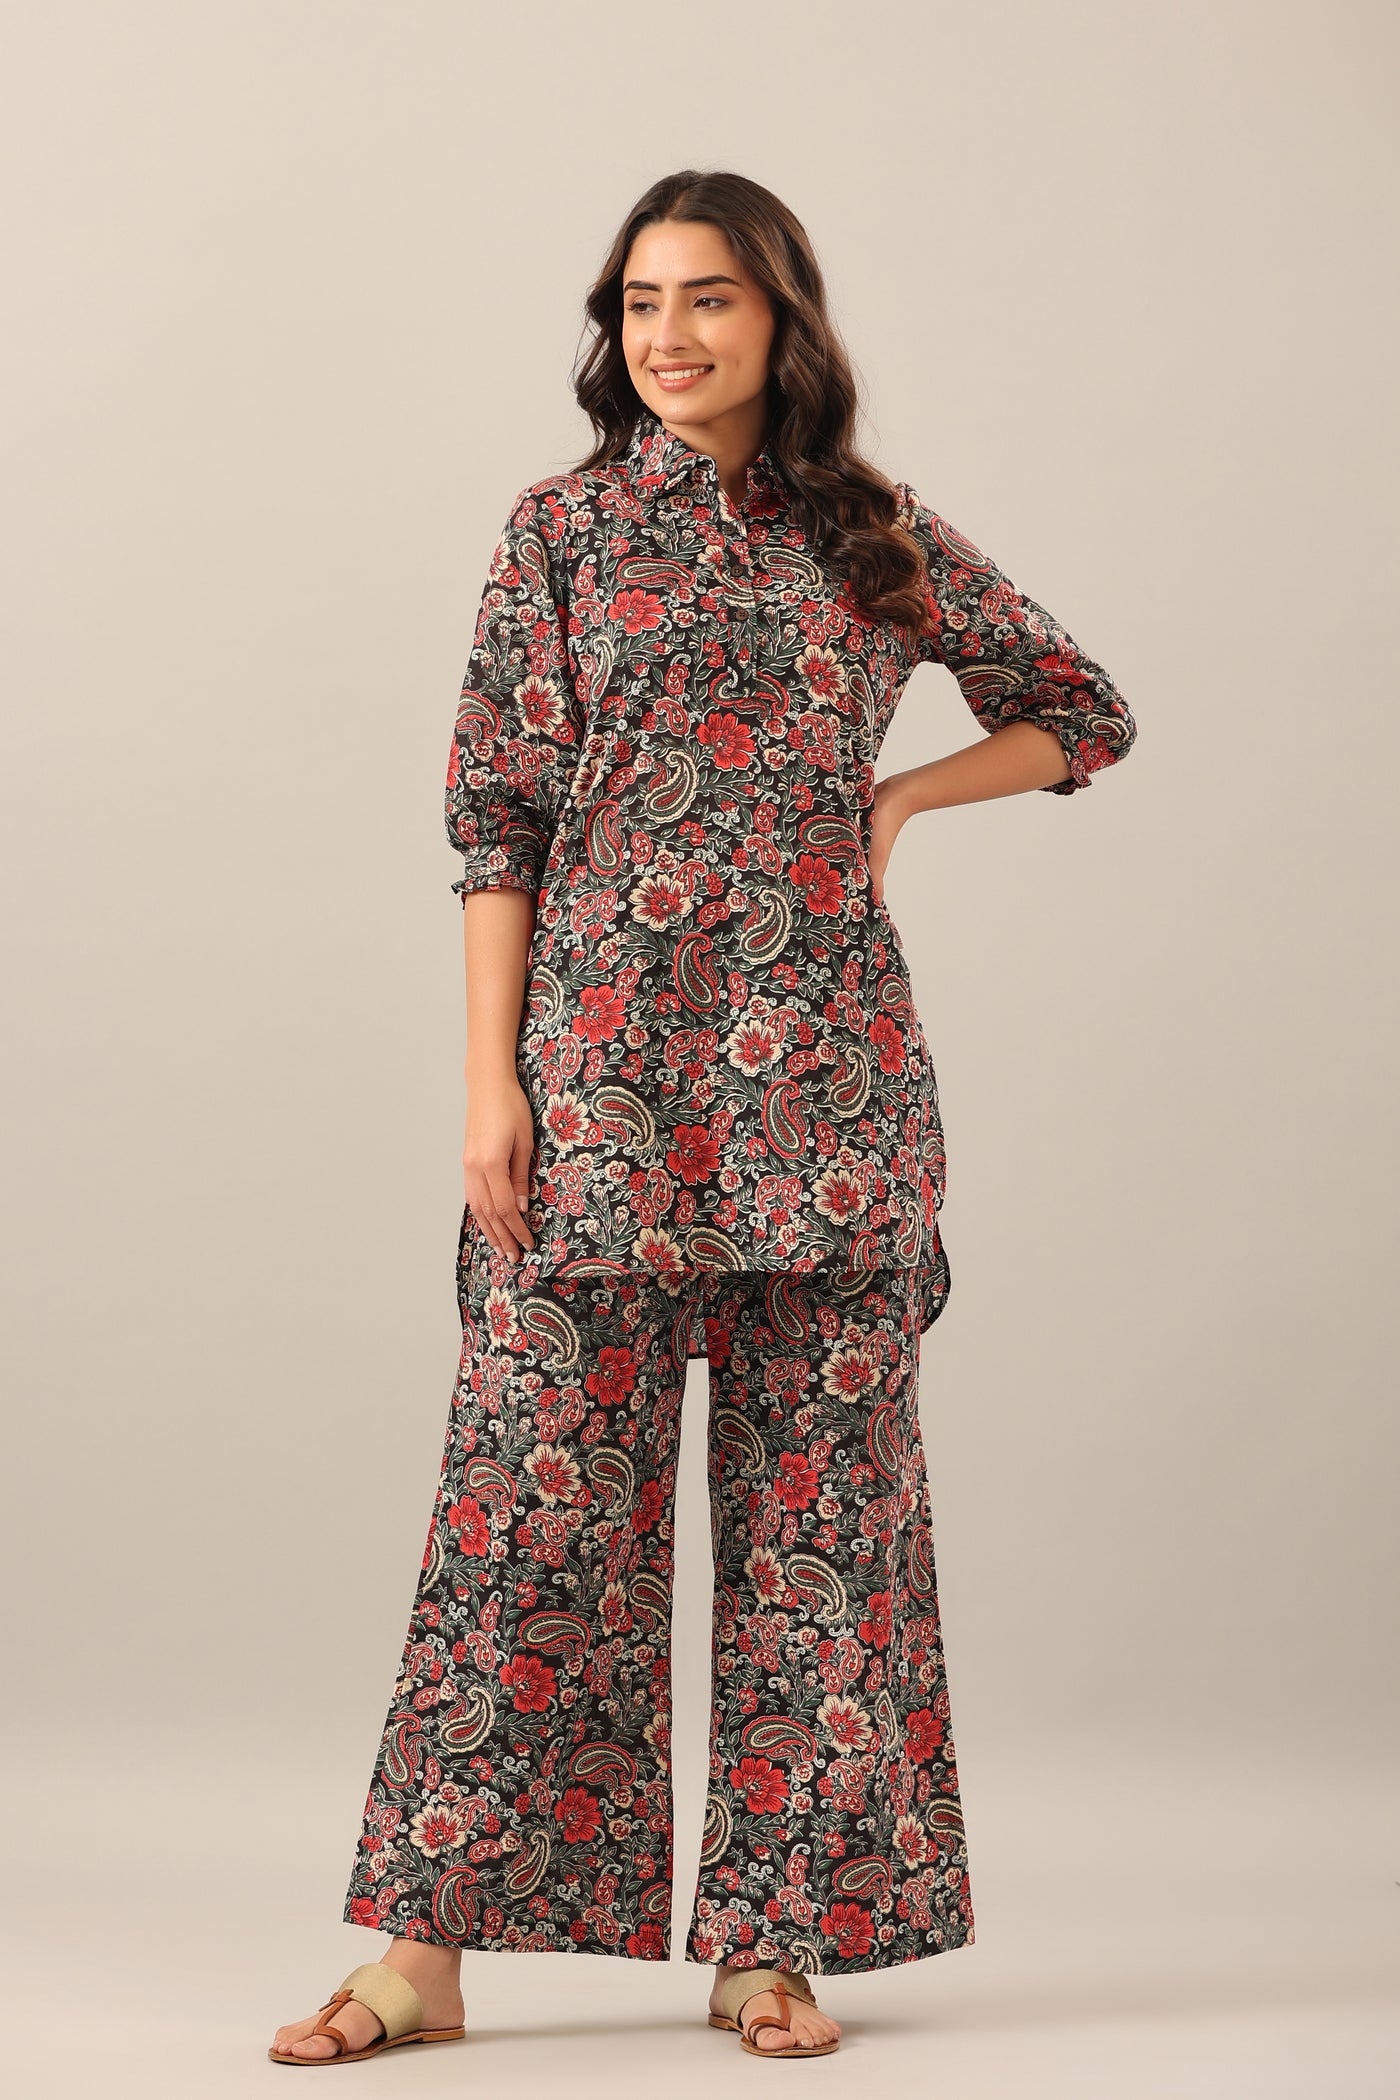 Boho Pants - Palazzo Pants in Floral in Indian Paisley Red For Women